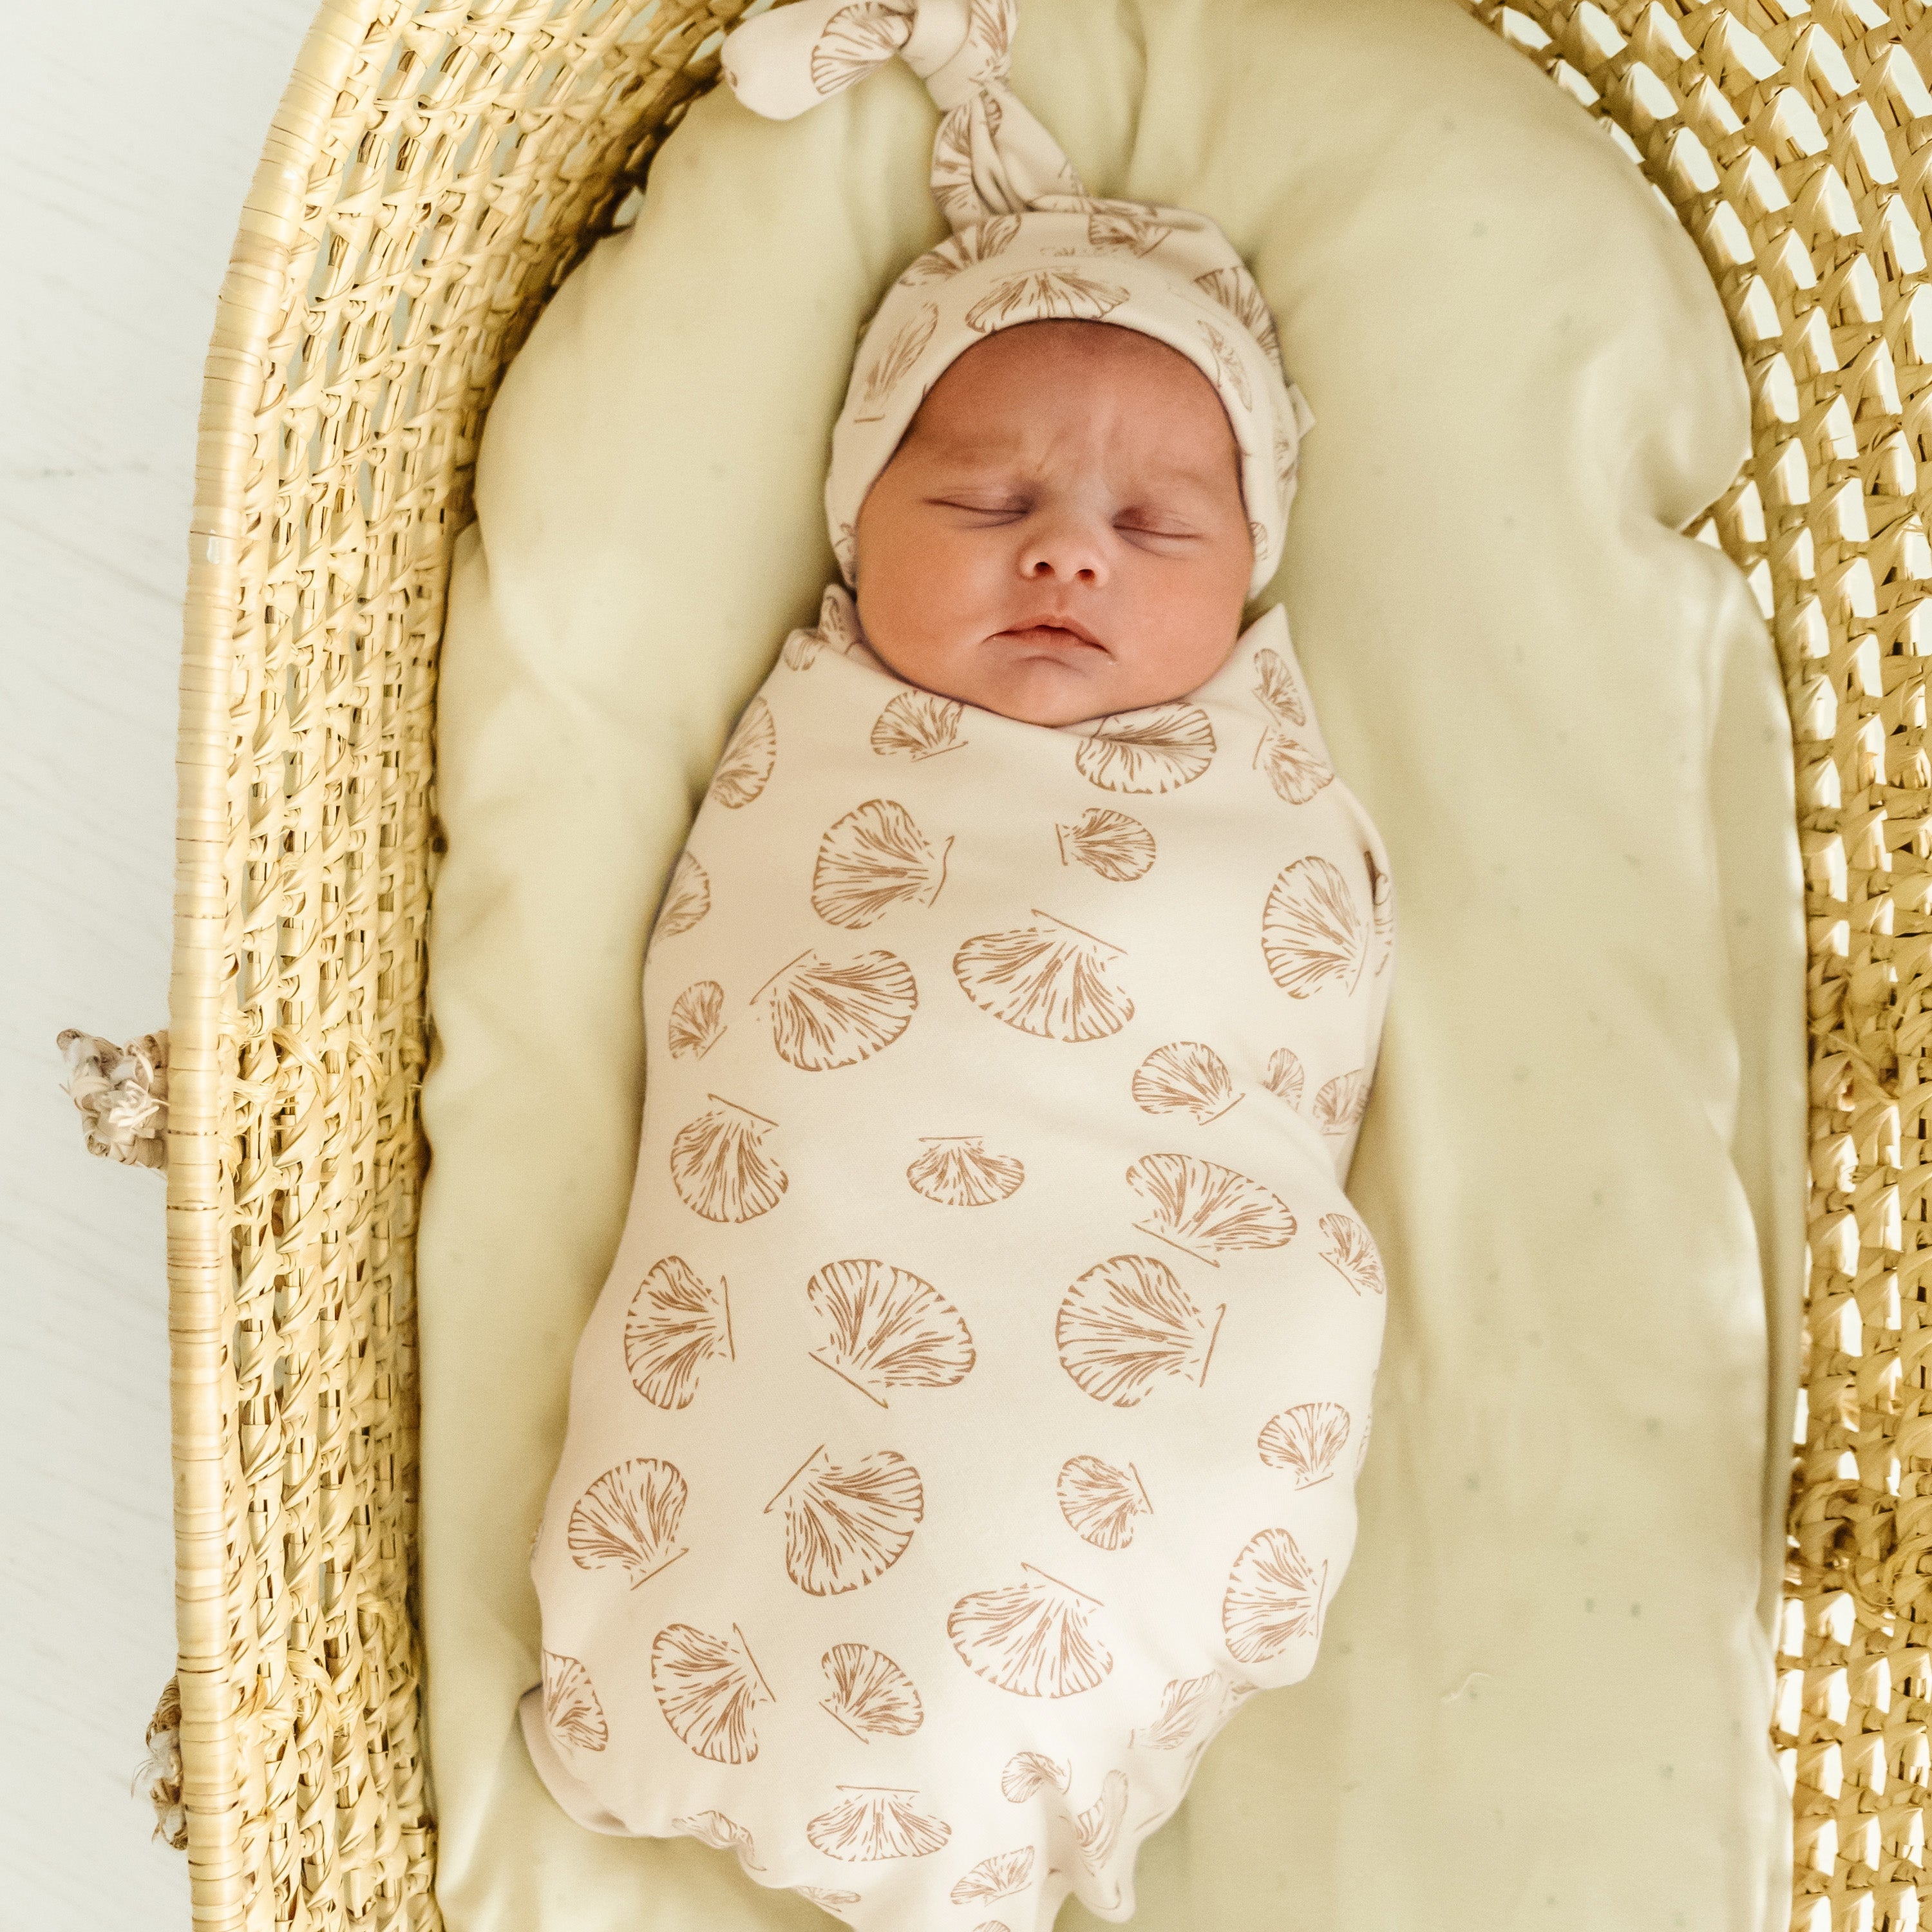 A newborn baby swaddled in a Makemake Organics cream-colored Organic Swaddle Blanket with a Seashells pattern, sleeping in a wicker bassinet on a light green cushion. The baby wears a matching headband.